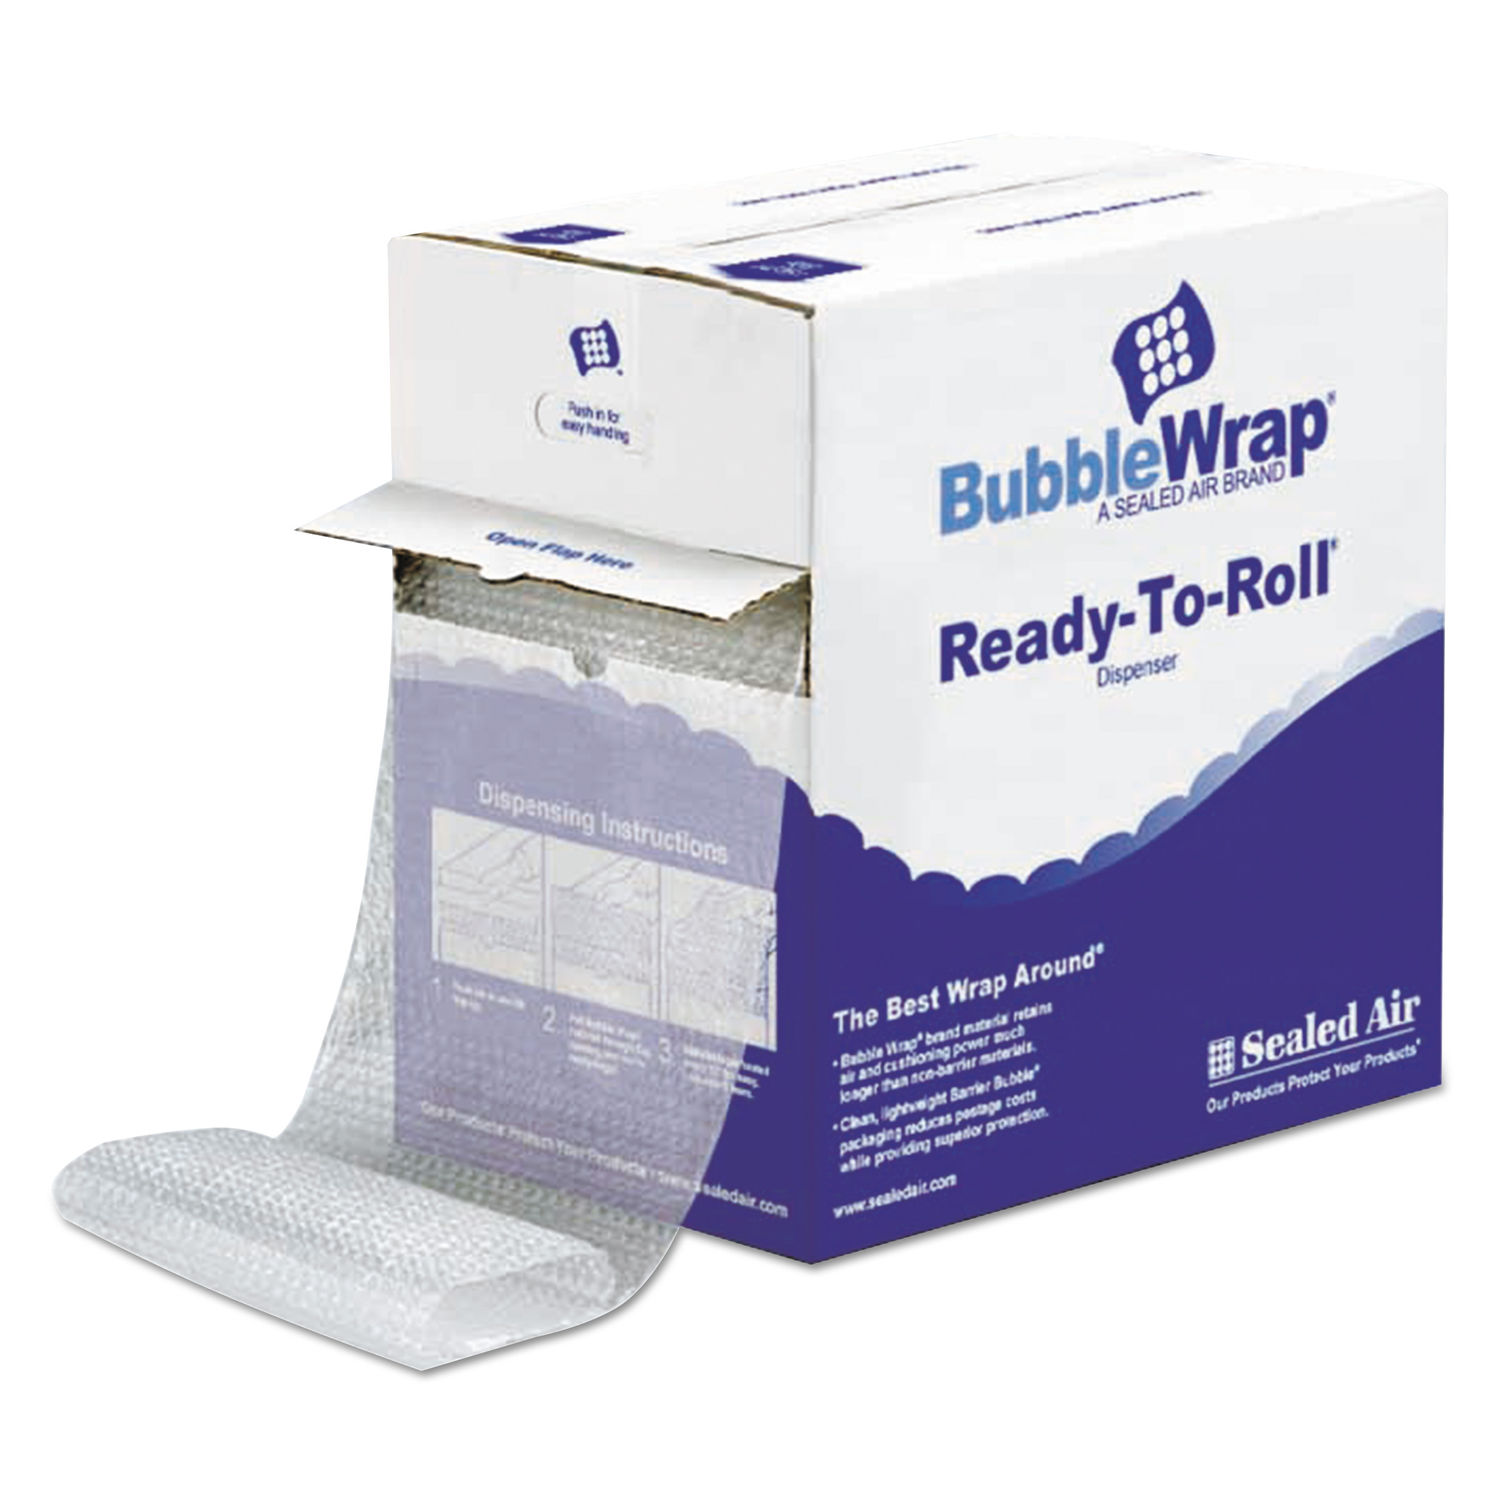 Bubble Wrap Cushioning Material in Dispenser Box 0.19" Thick, 12" x 175 ft